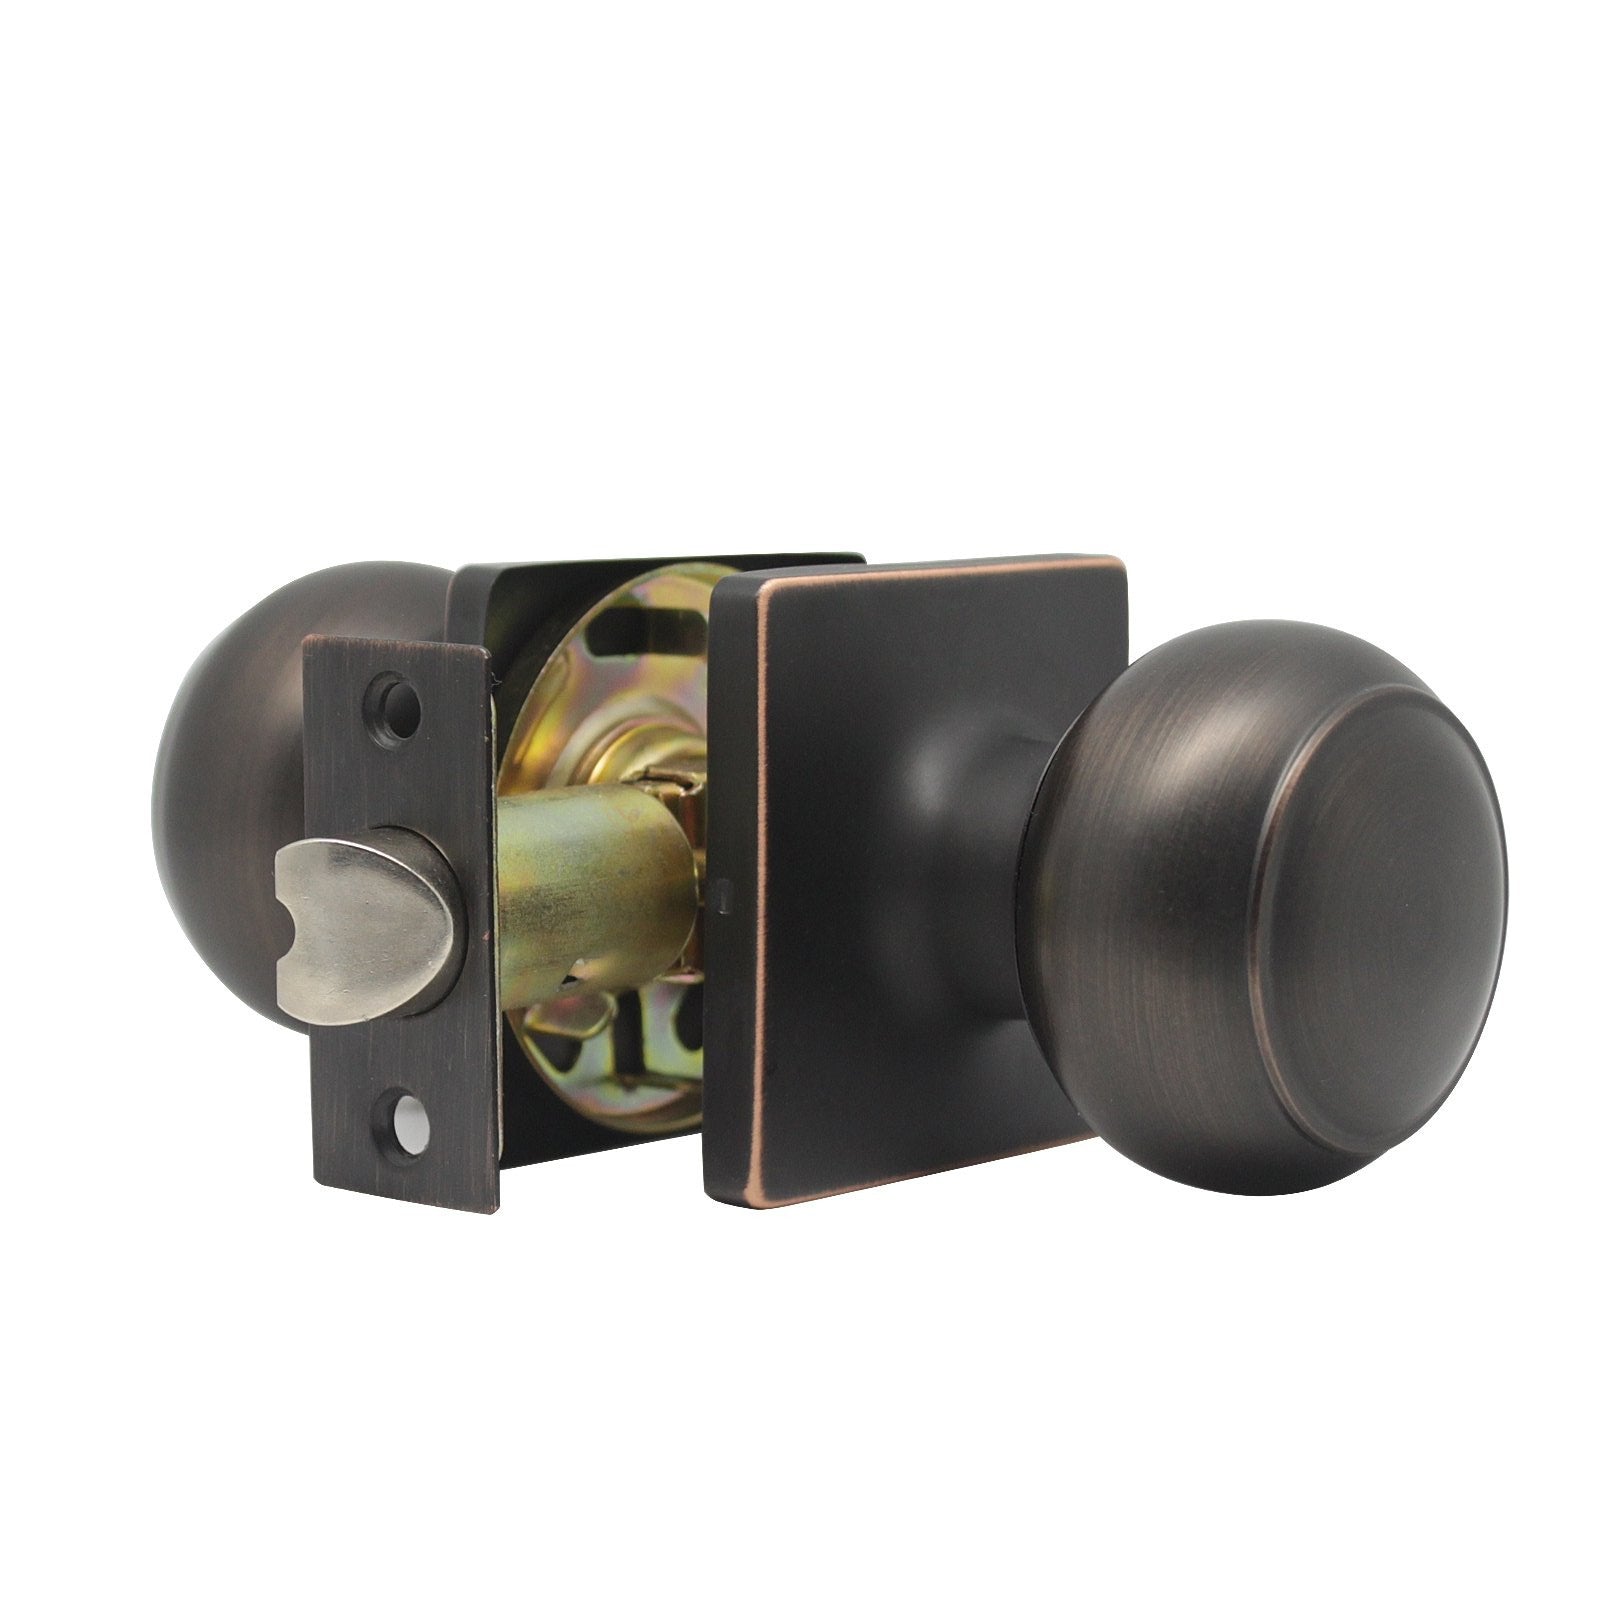 Flat Ball Knob with Square Rosette, Passage Door Knobs Oil Rubbed Bronze Finish DLS09ORBPS